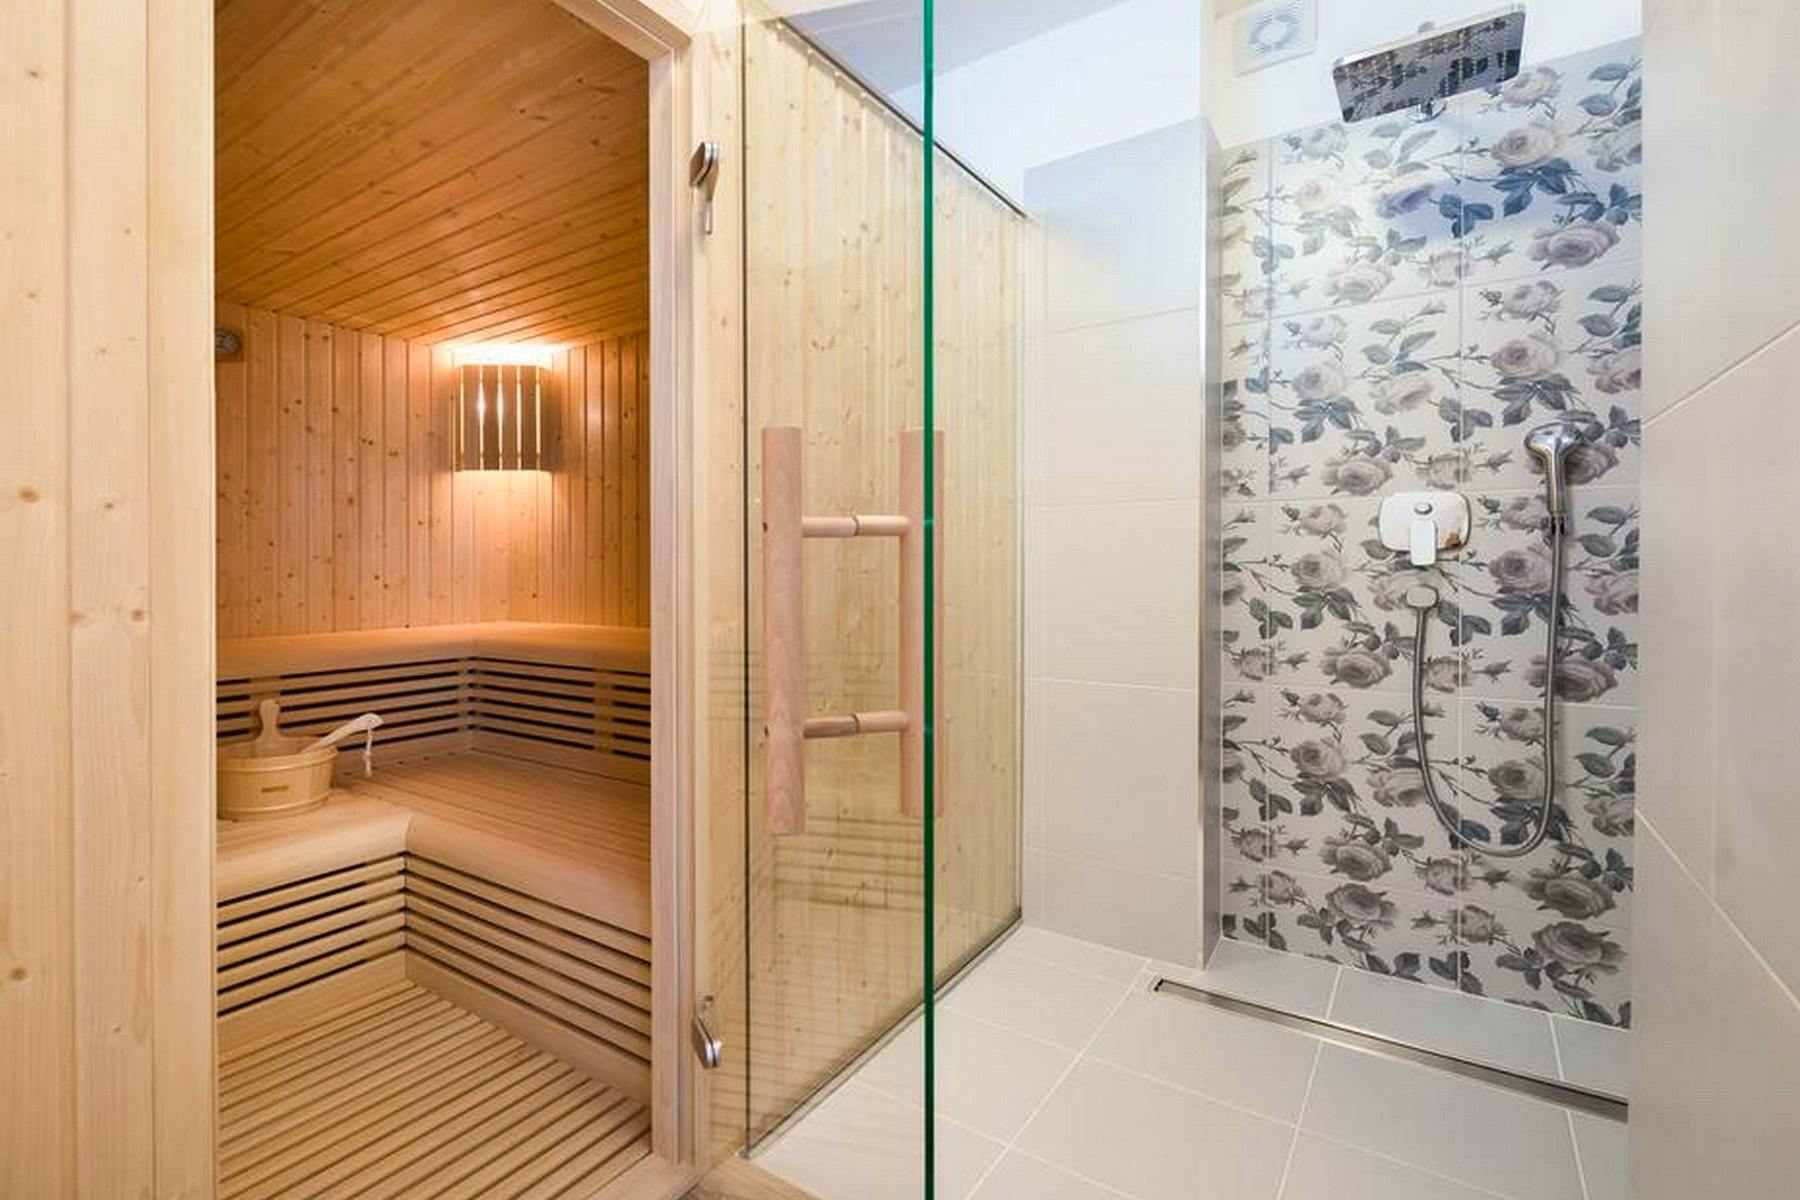 Spa area with a sauna and walk-in shower